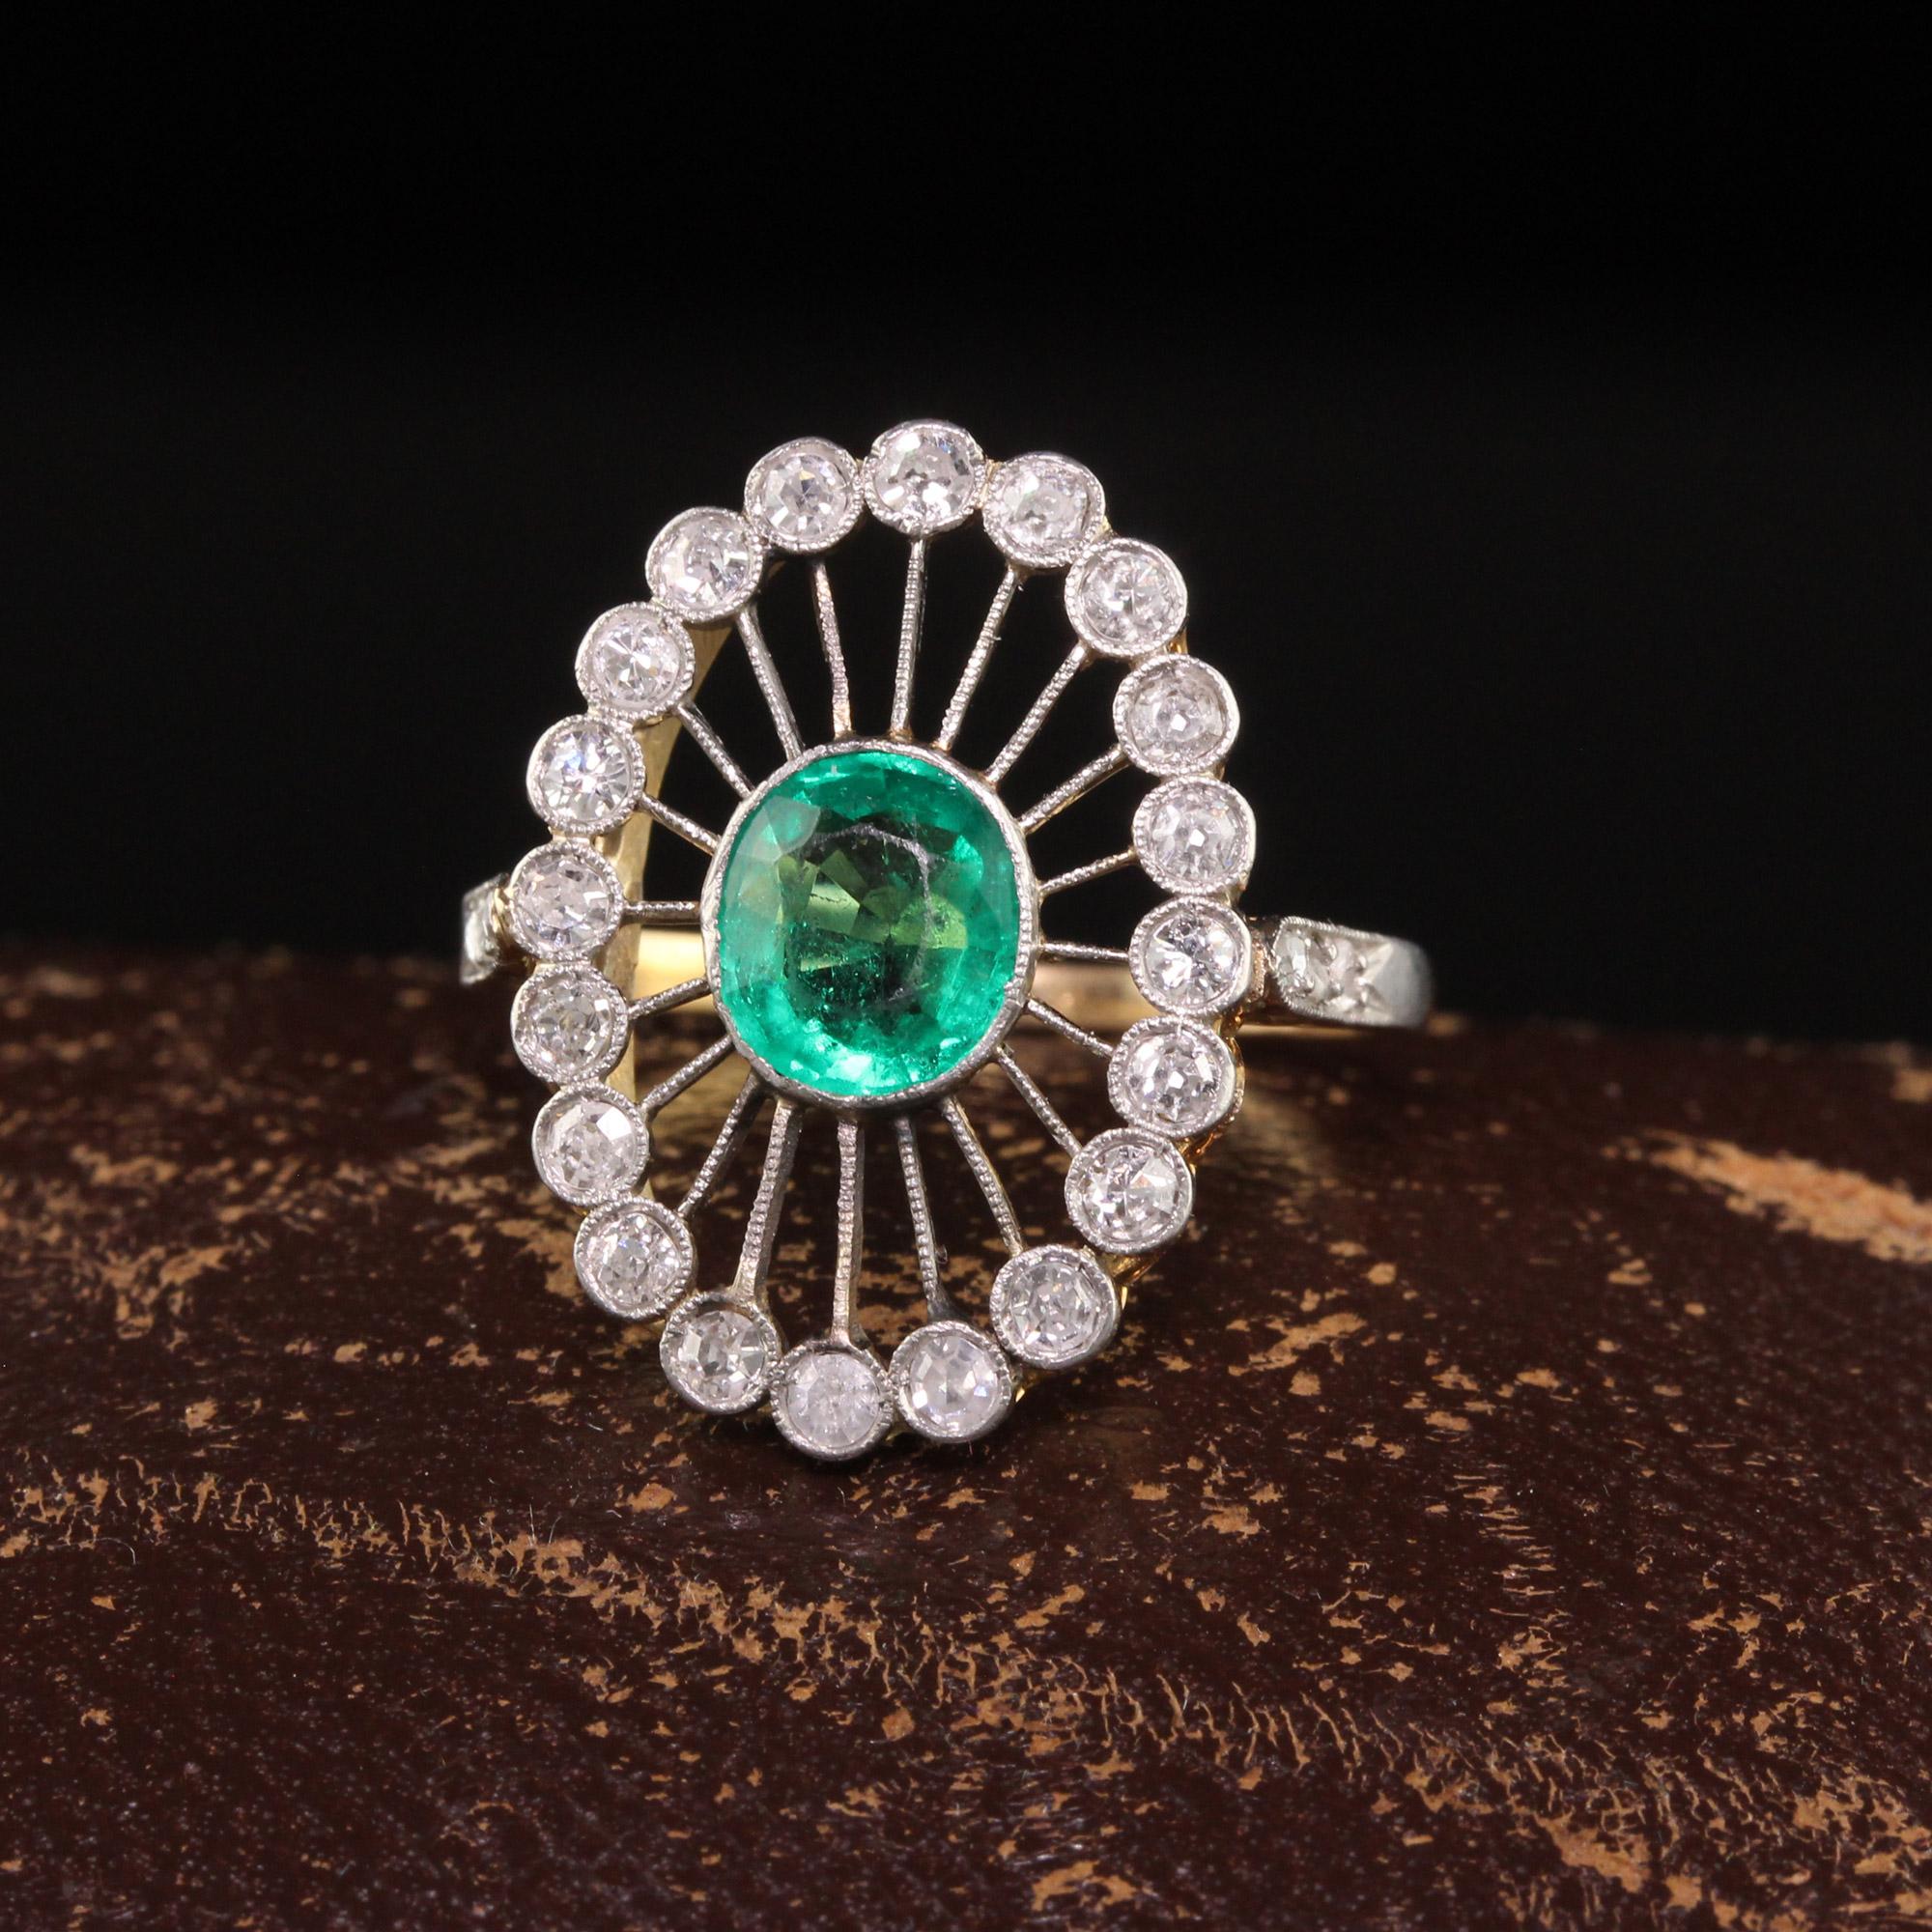 Beautiful Antique Edwardian 18K Yellow Gold Colombian Emerald and Diamond Ring. This gorgeous ring is crafted in 18k yellow gold and platinum top. The center holds a natural Colombian emerald that is surrounded by single cut diamonds in a web